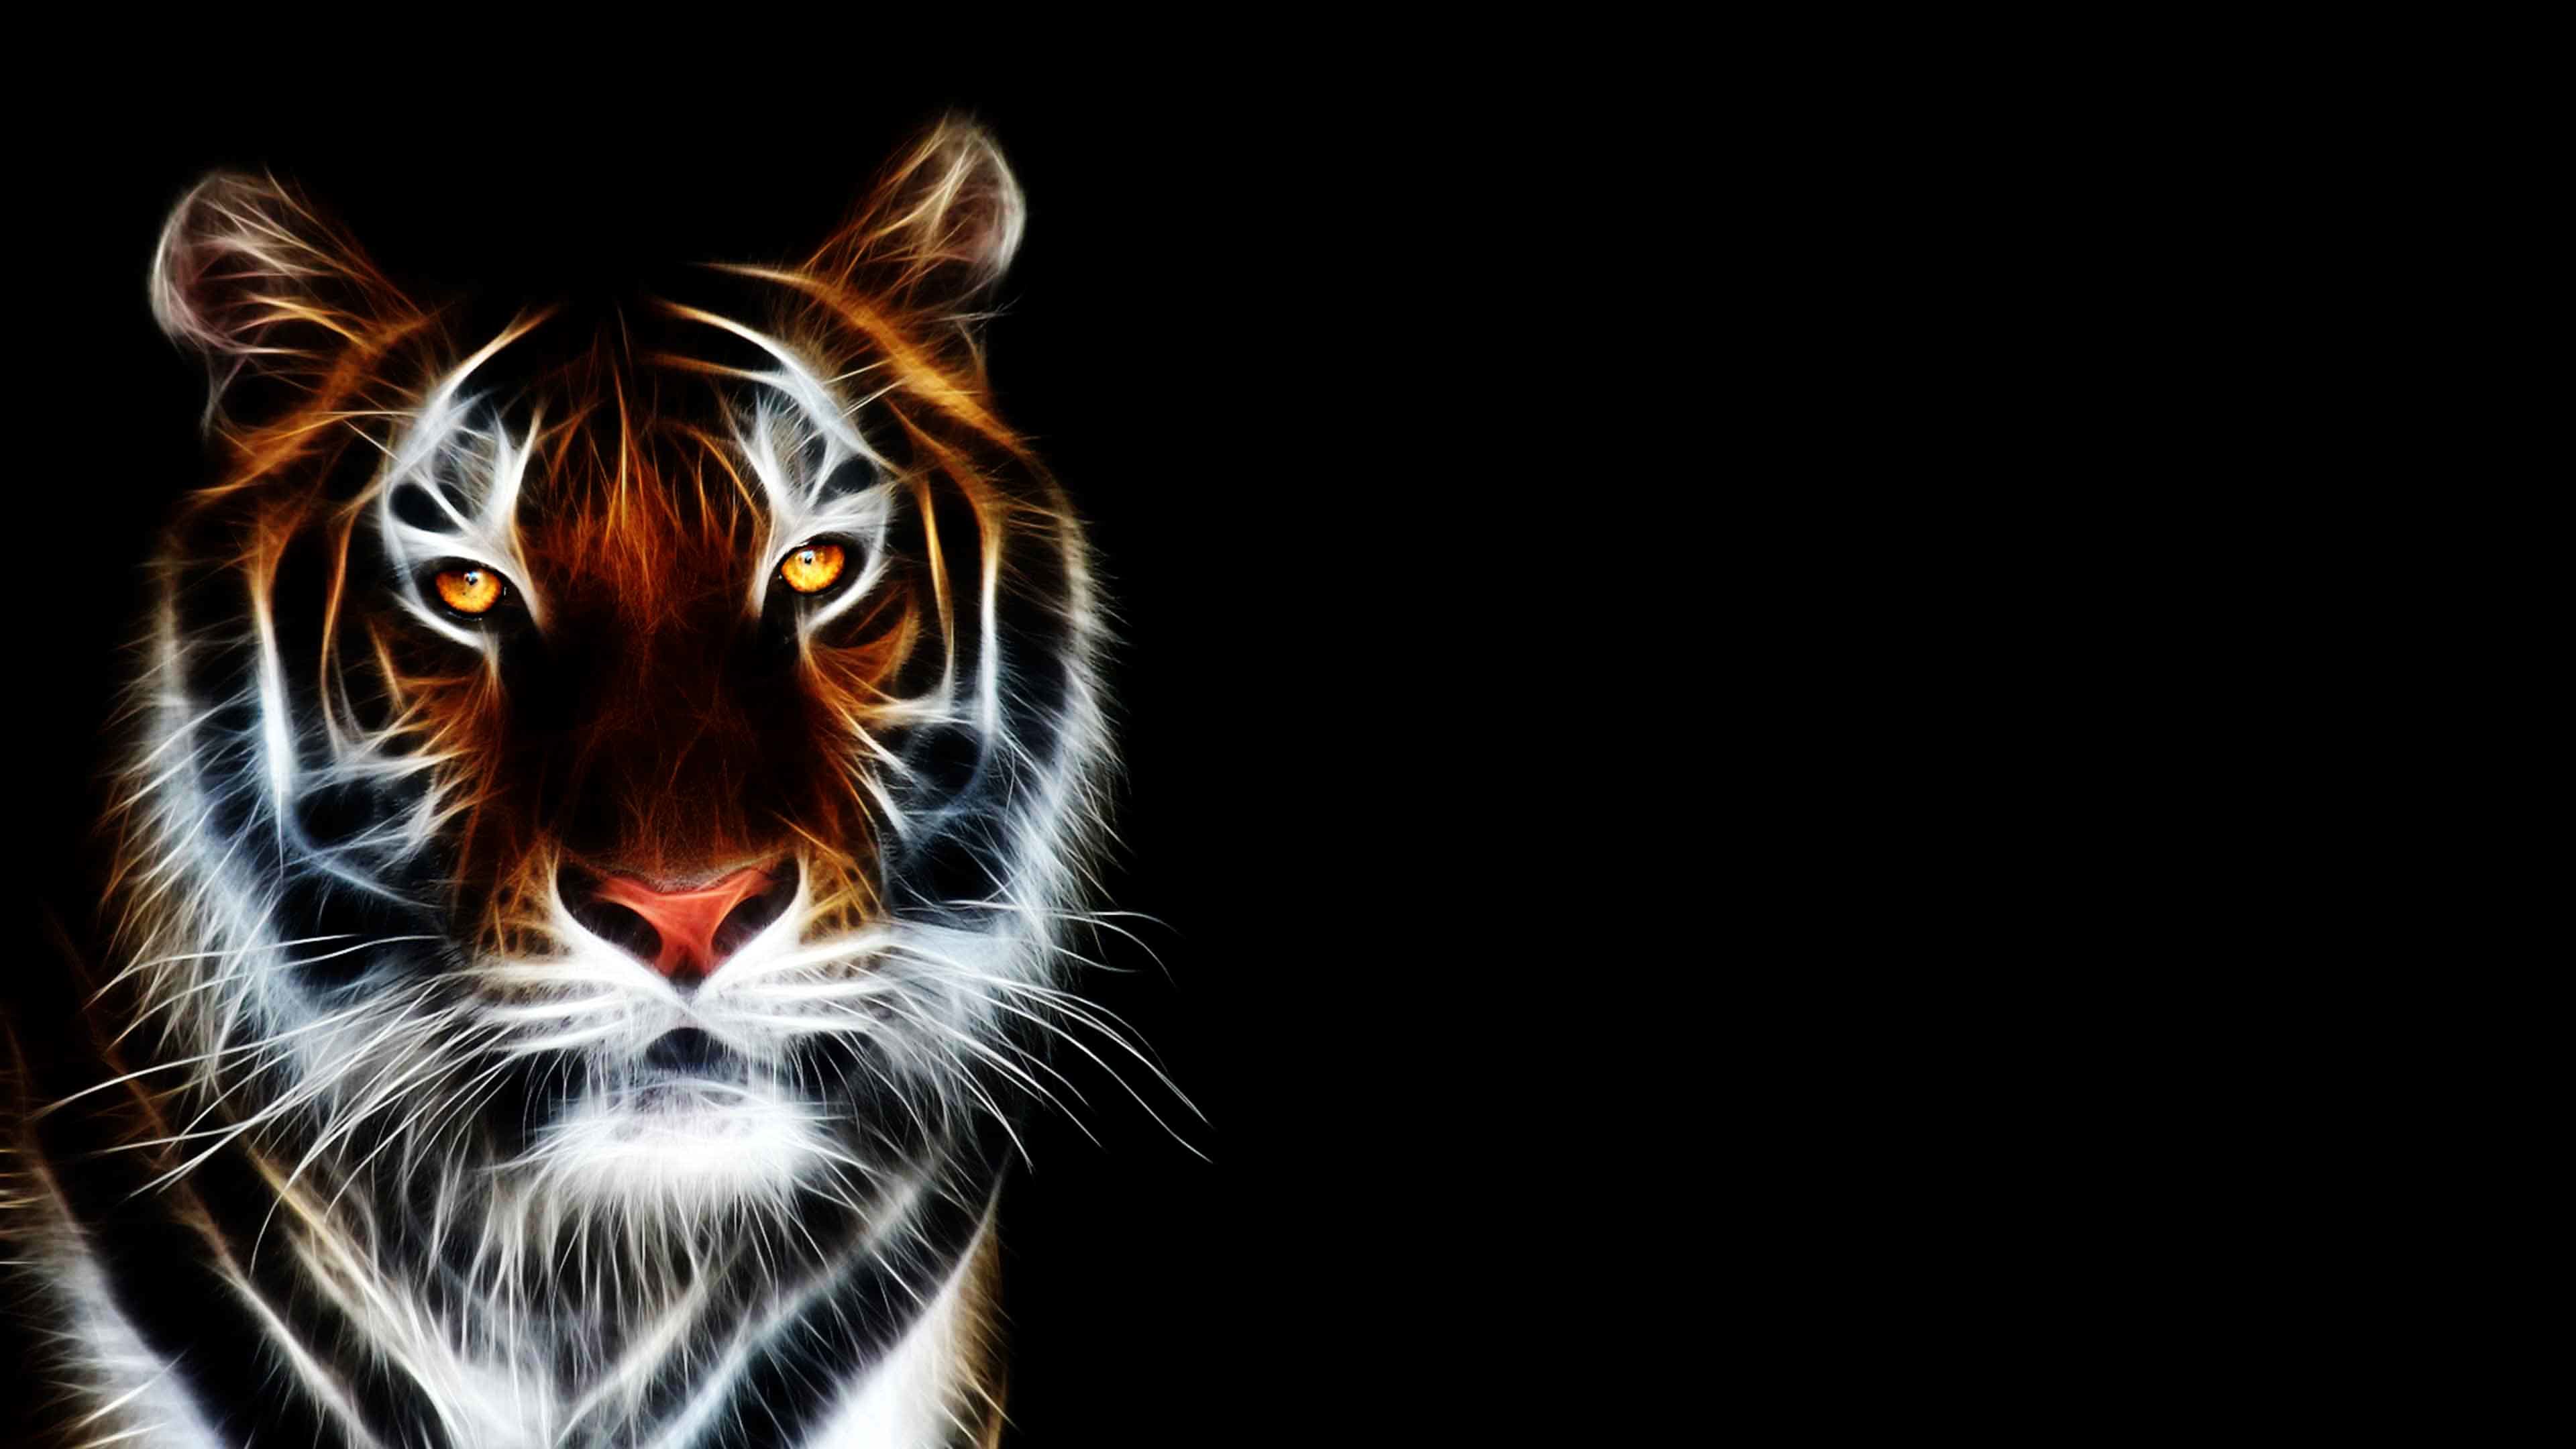 3840x2160 ... 3d Animated Tiger Wallpapers | 3d wallpaper HD